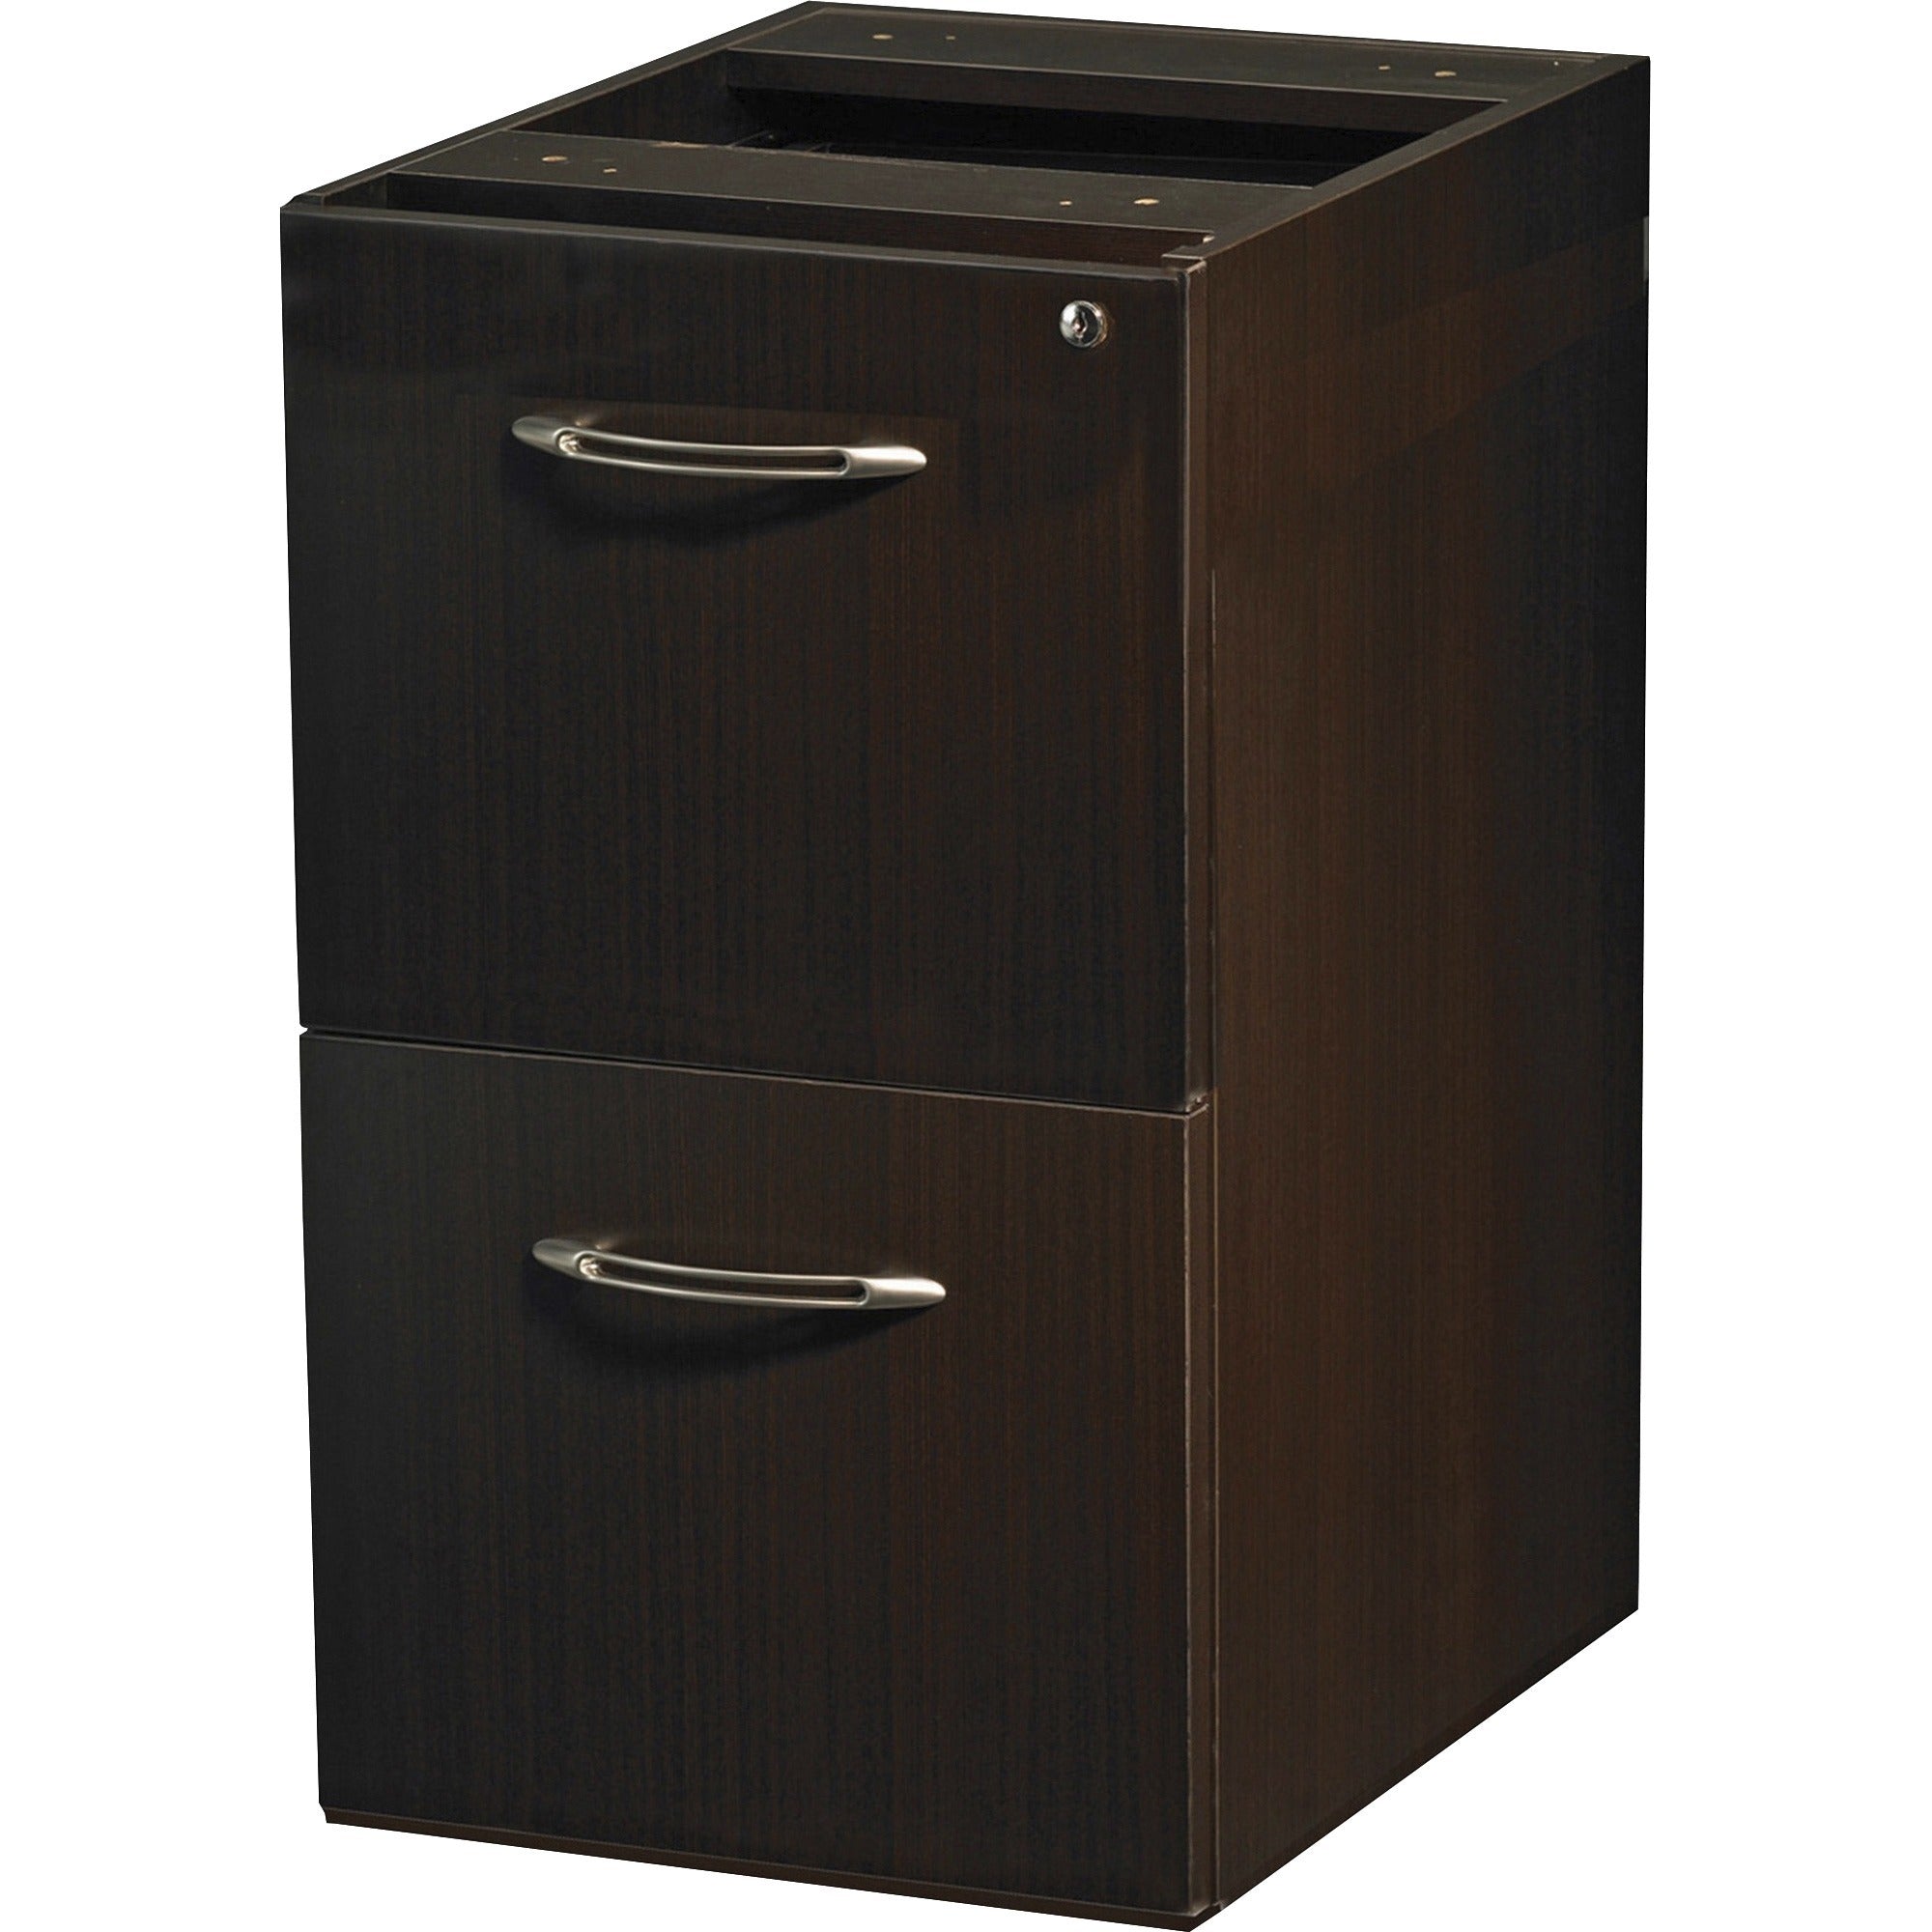 safco-aberdeen-series-file-pedestal-153-x-20-x-275-fluted-edge-material-particleboard-finish-laminate-mocha-security-lock-abrasion-resistant-stain-resistant-cord-management-grommet-modesty-panel-leveling-glide-scratch-resista_safaff20ldc - 1